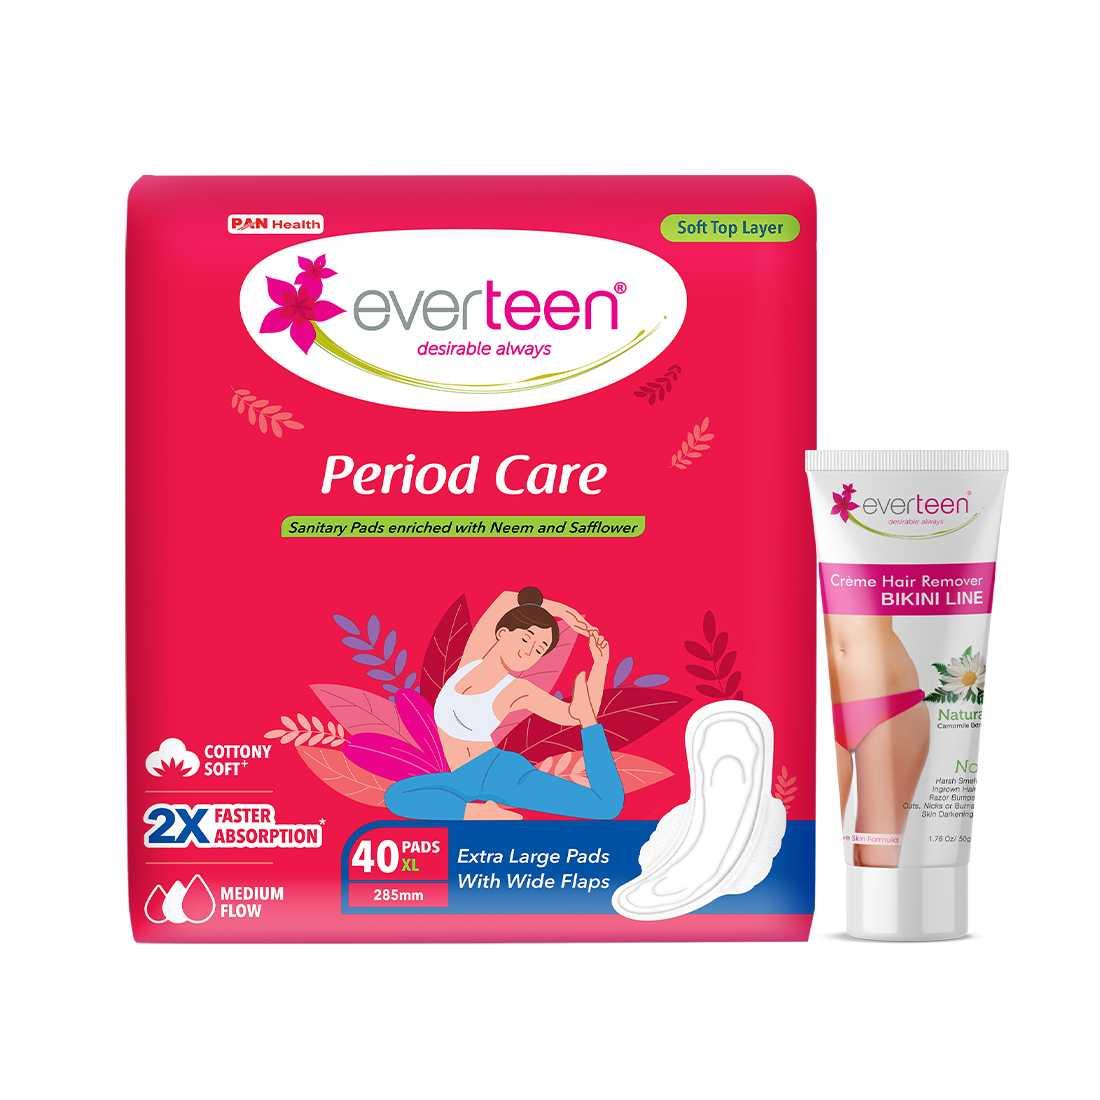 everteen Period Care XL Soft 40 Pads and Natural Bikini Line Hair Remover Cream 50g